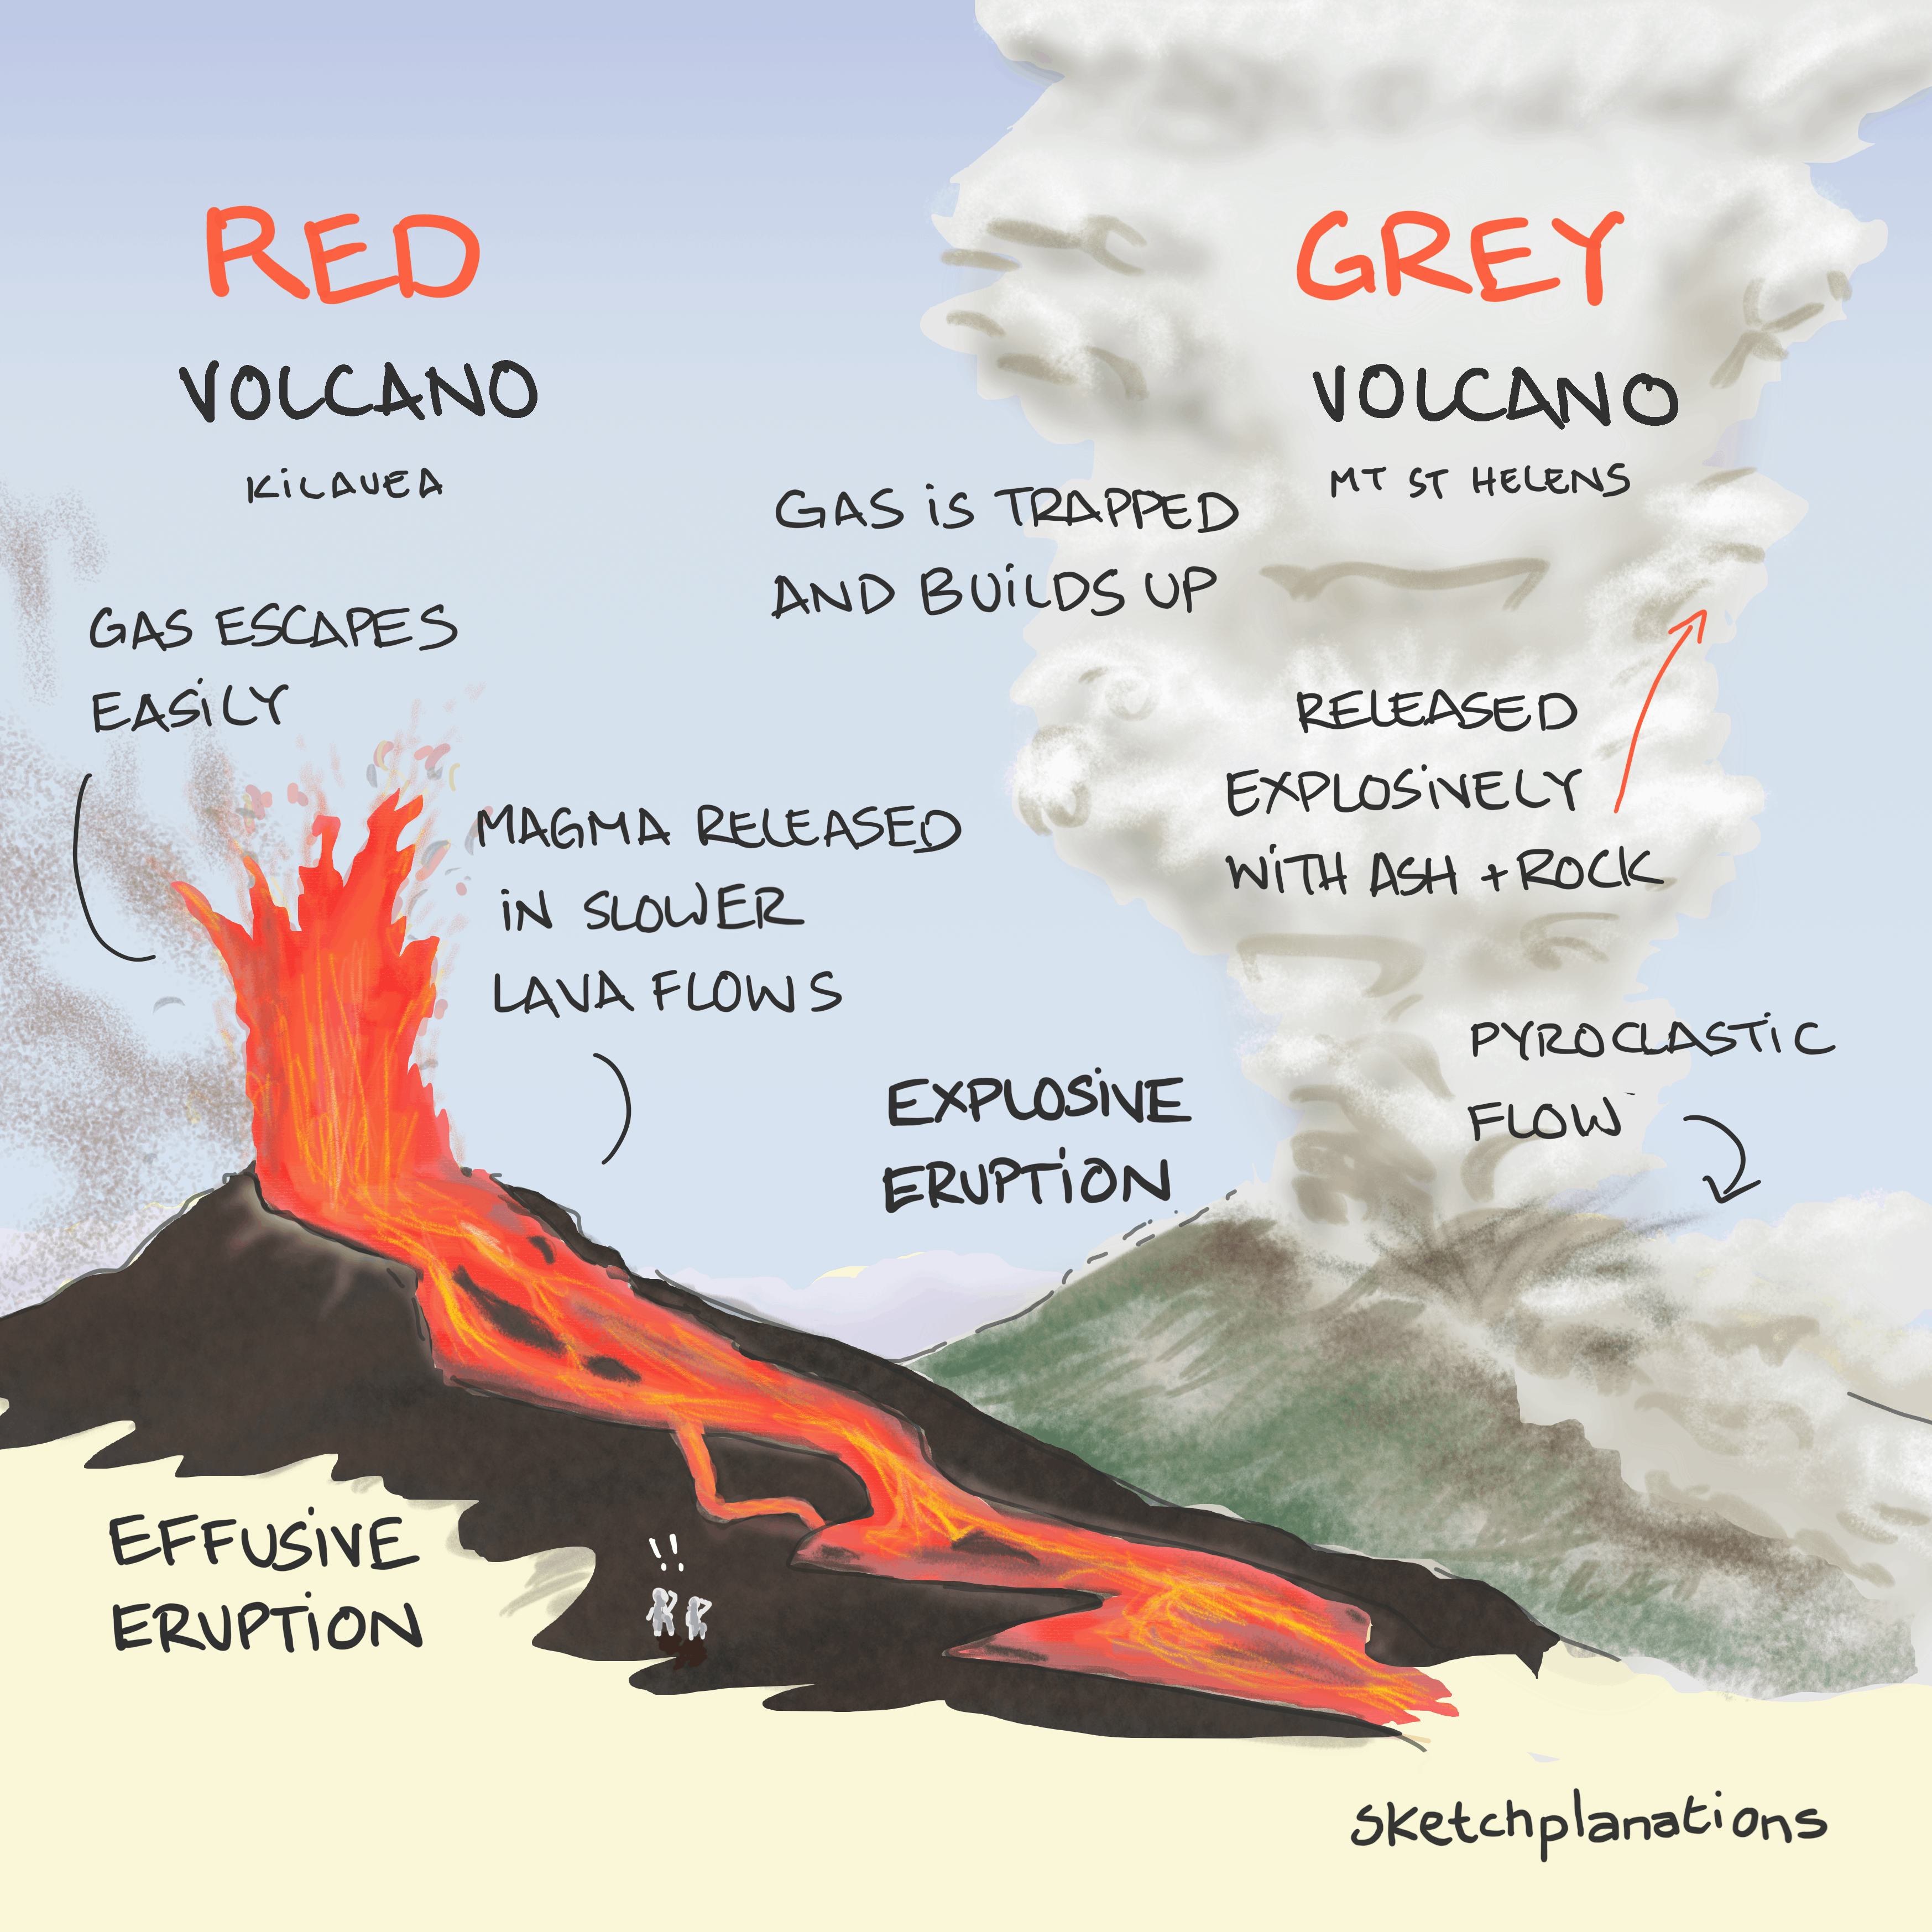 Red volcano gray volcano - a red volcano's effusive eruption has lava flowing down its slope while a gray volcano's explosive eruption shoots ash into the air